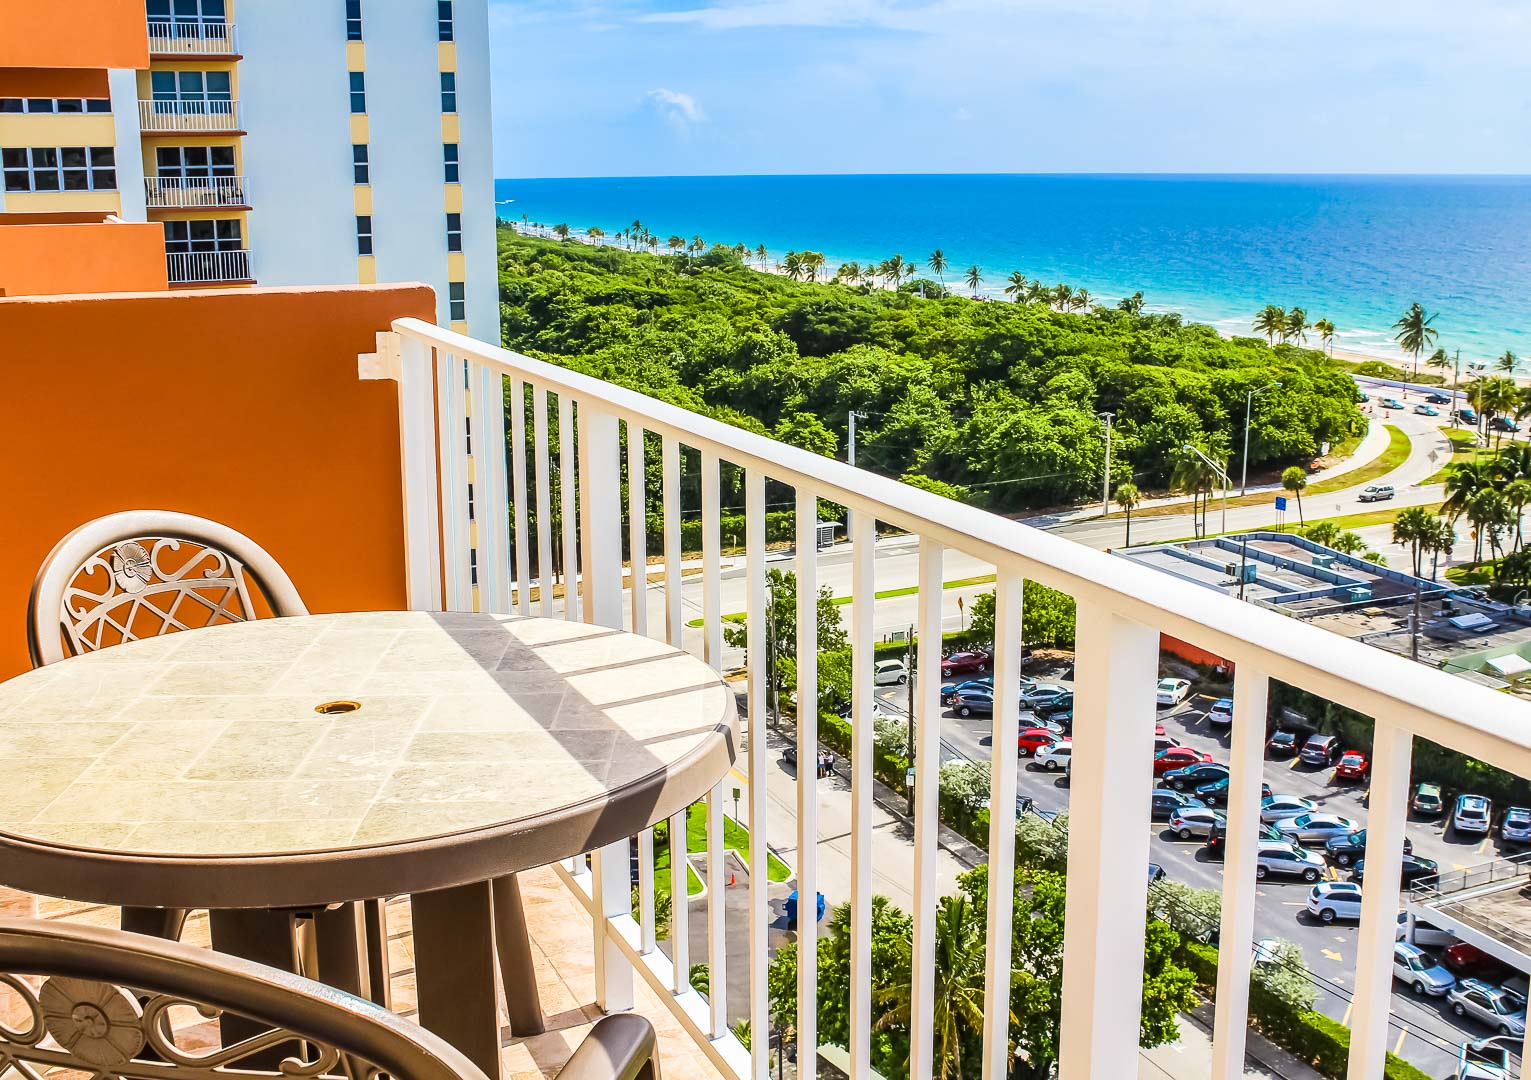 A balcony view to the beach at VRI's Ft. Lauderdale Beach Resort in Florida.